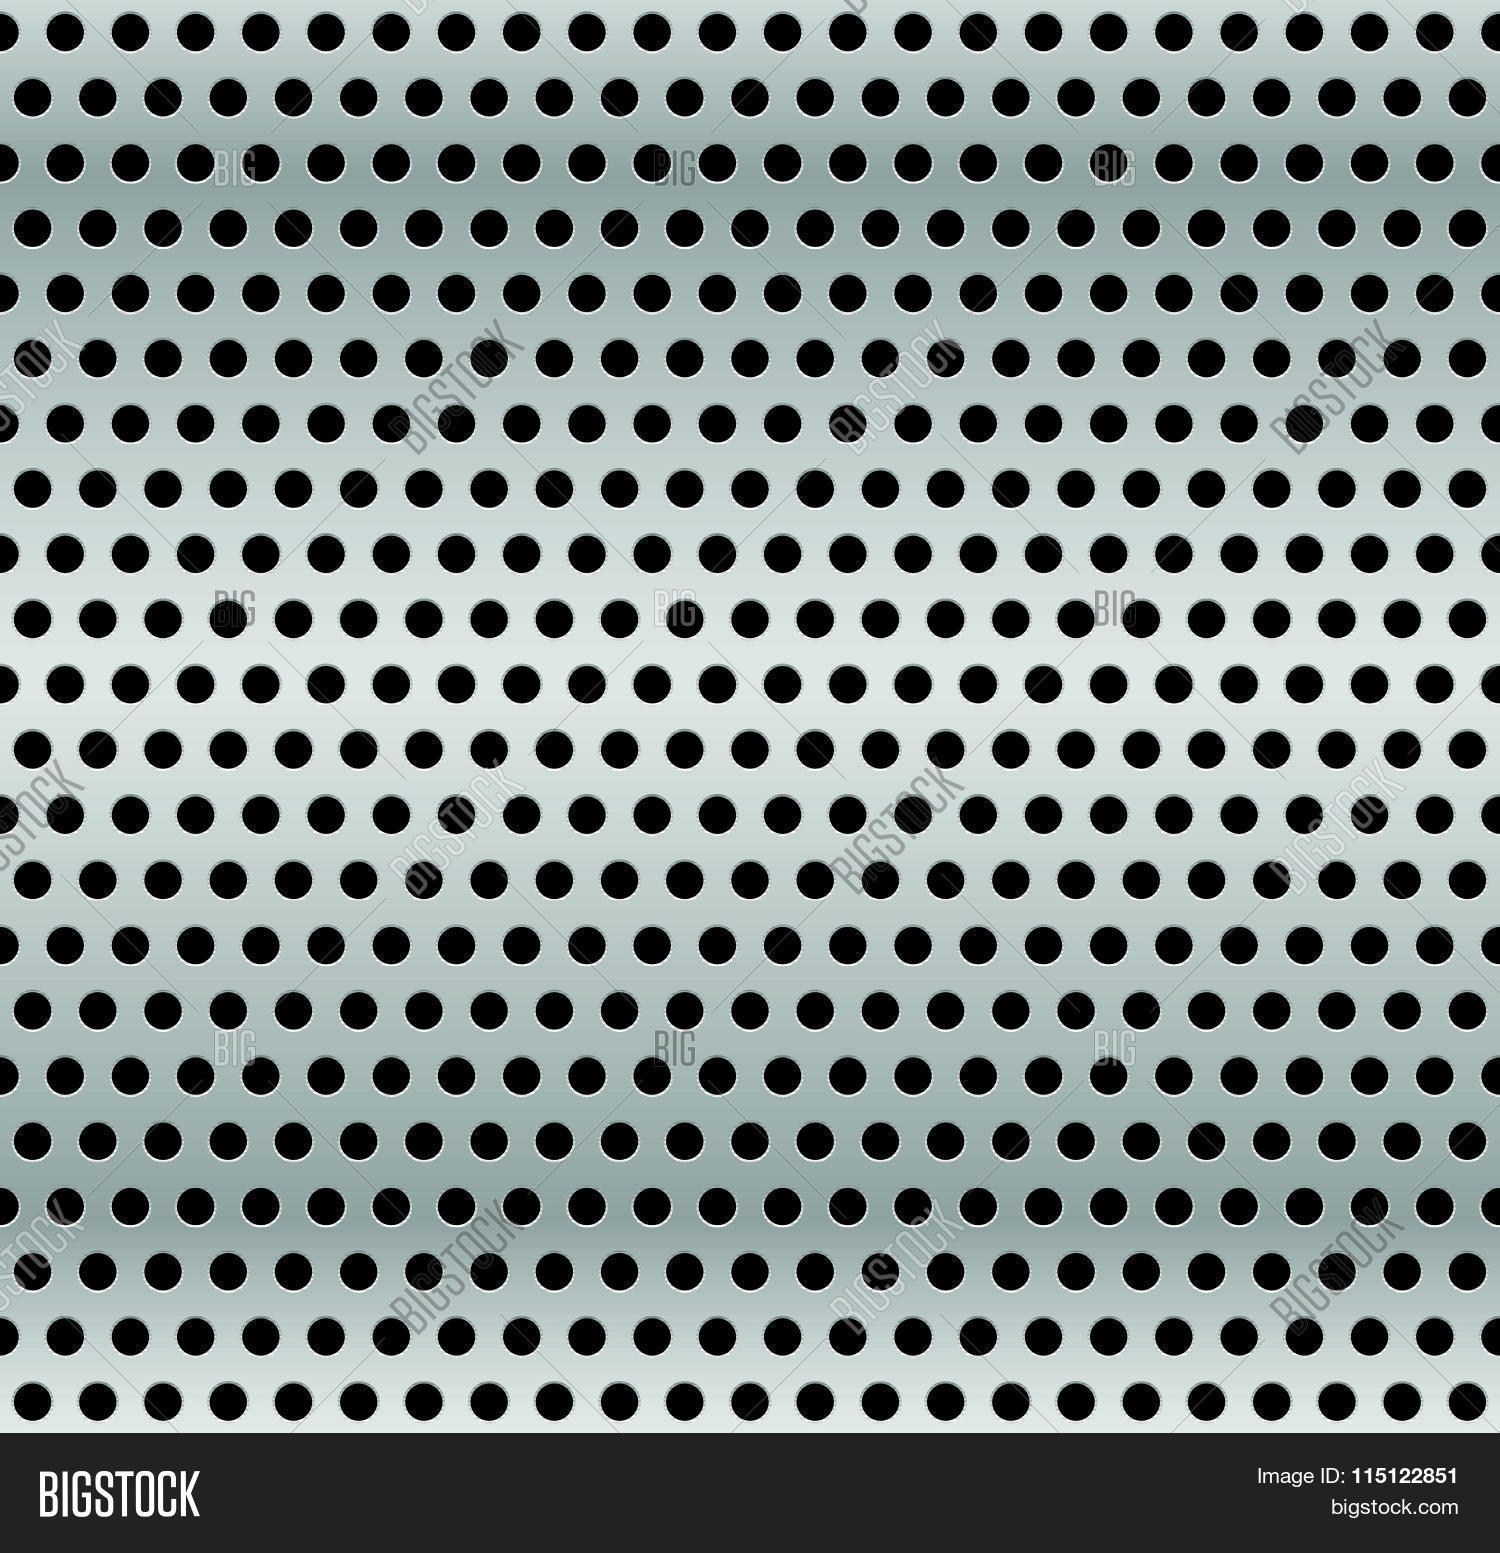 Perforated Metal Background. Vector & Photo | Bigstock